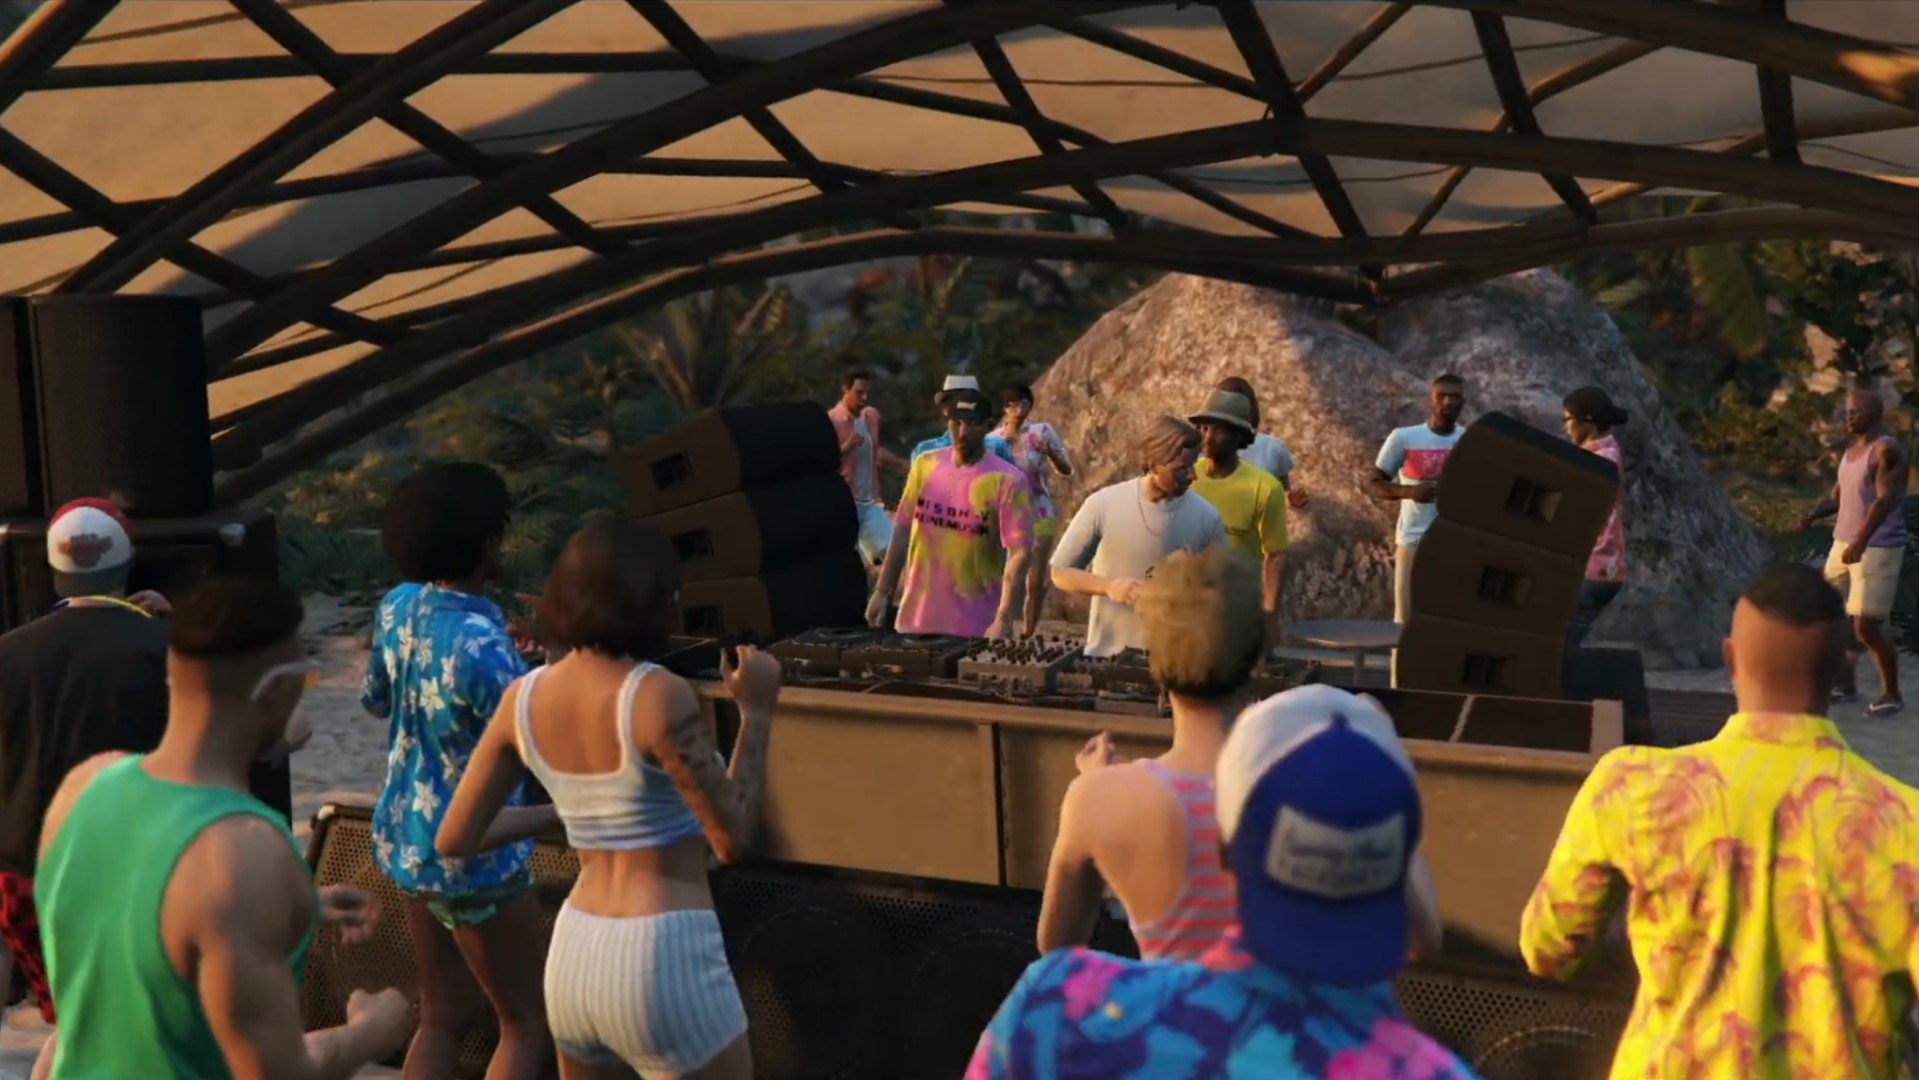 Grand Theft Auto Online's Biggest Adventure Yet, The Cayo Perico Heist Now  Available